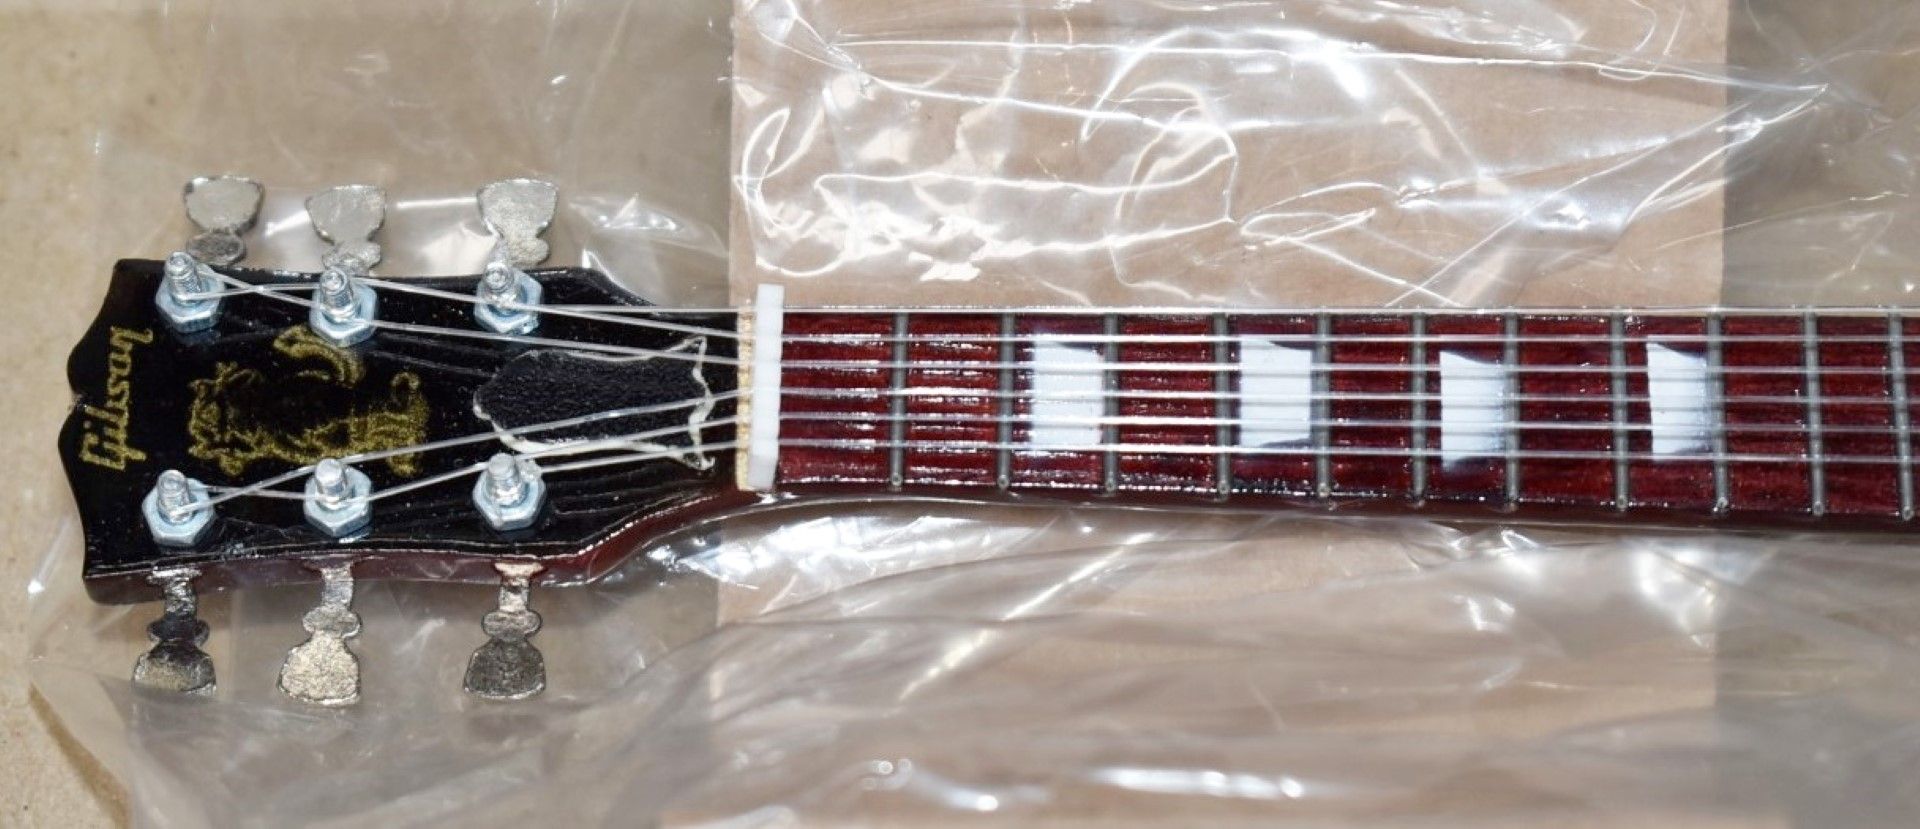 1 x Miniature Hand Made Guitar - ACDC Angus Young Gibson SG - New & Unused - RRP £35 - Boxed With - Image 5 of 7